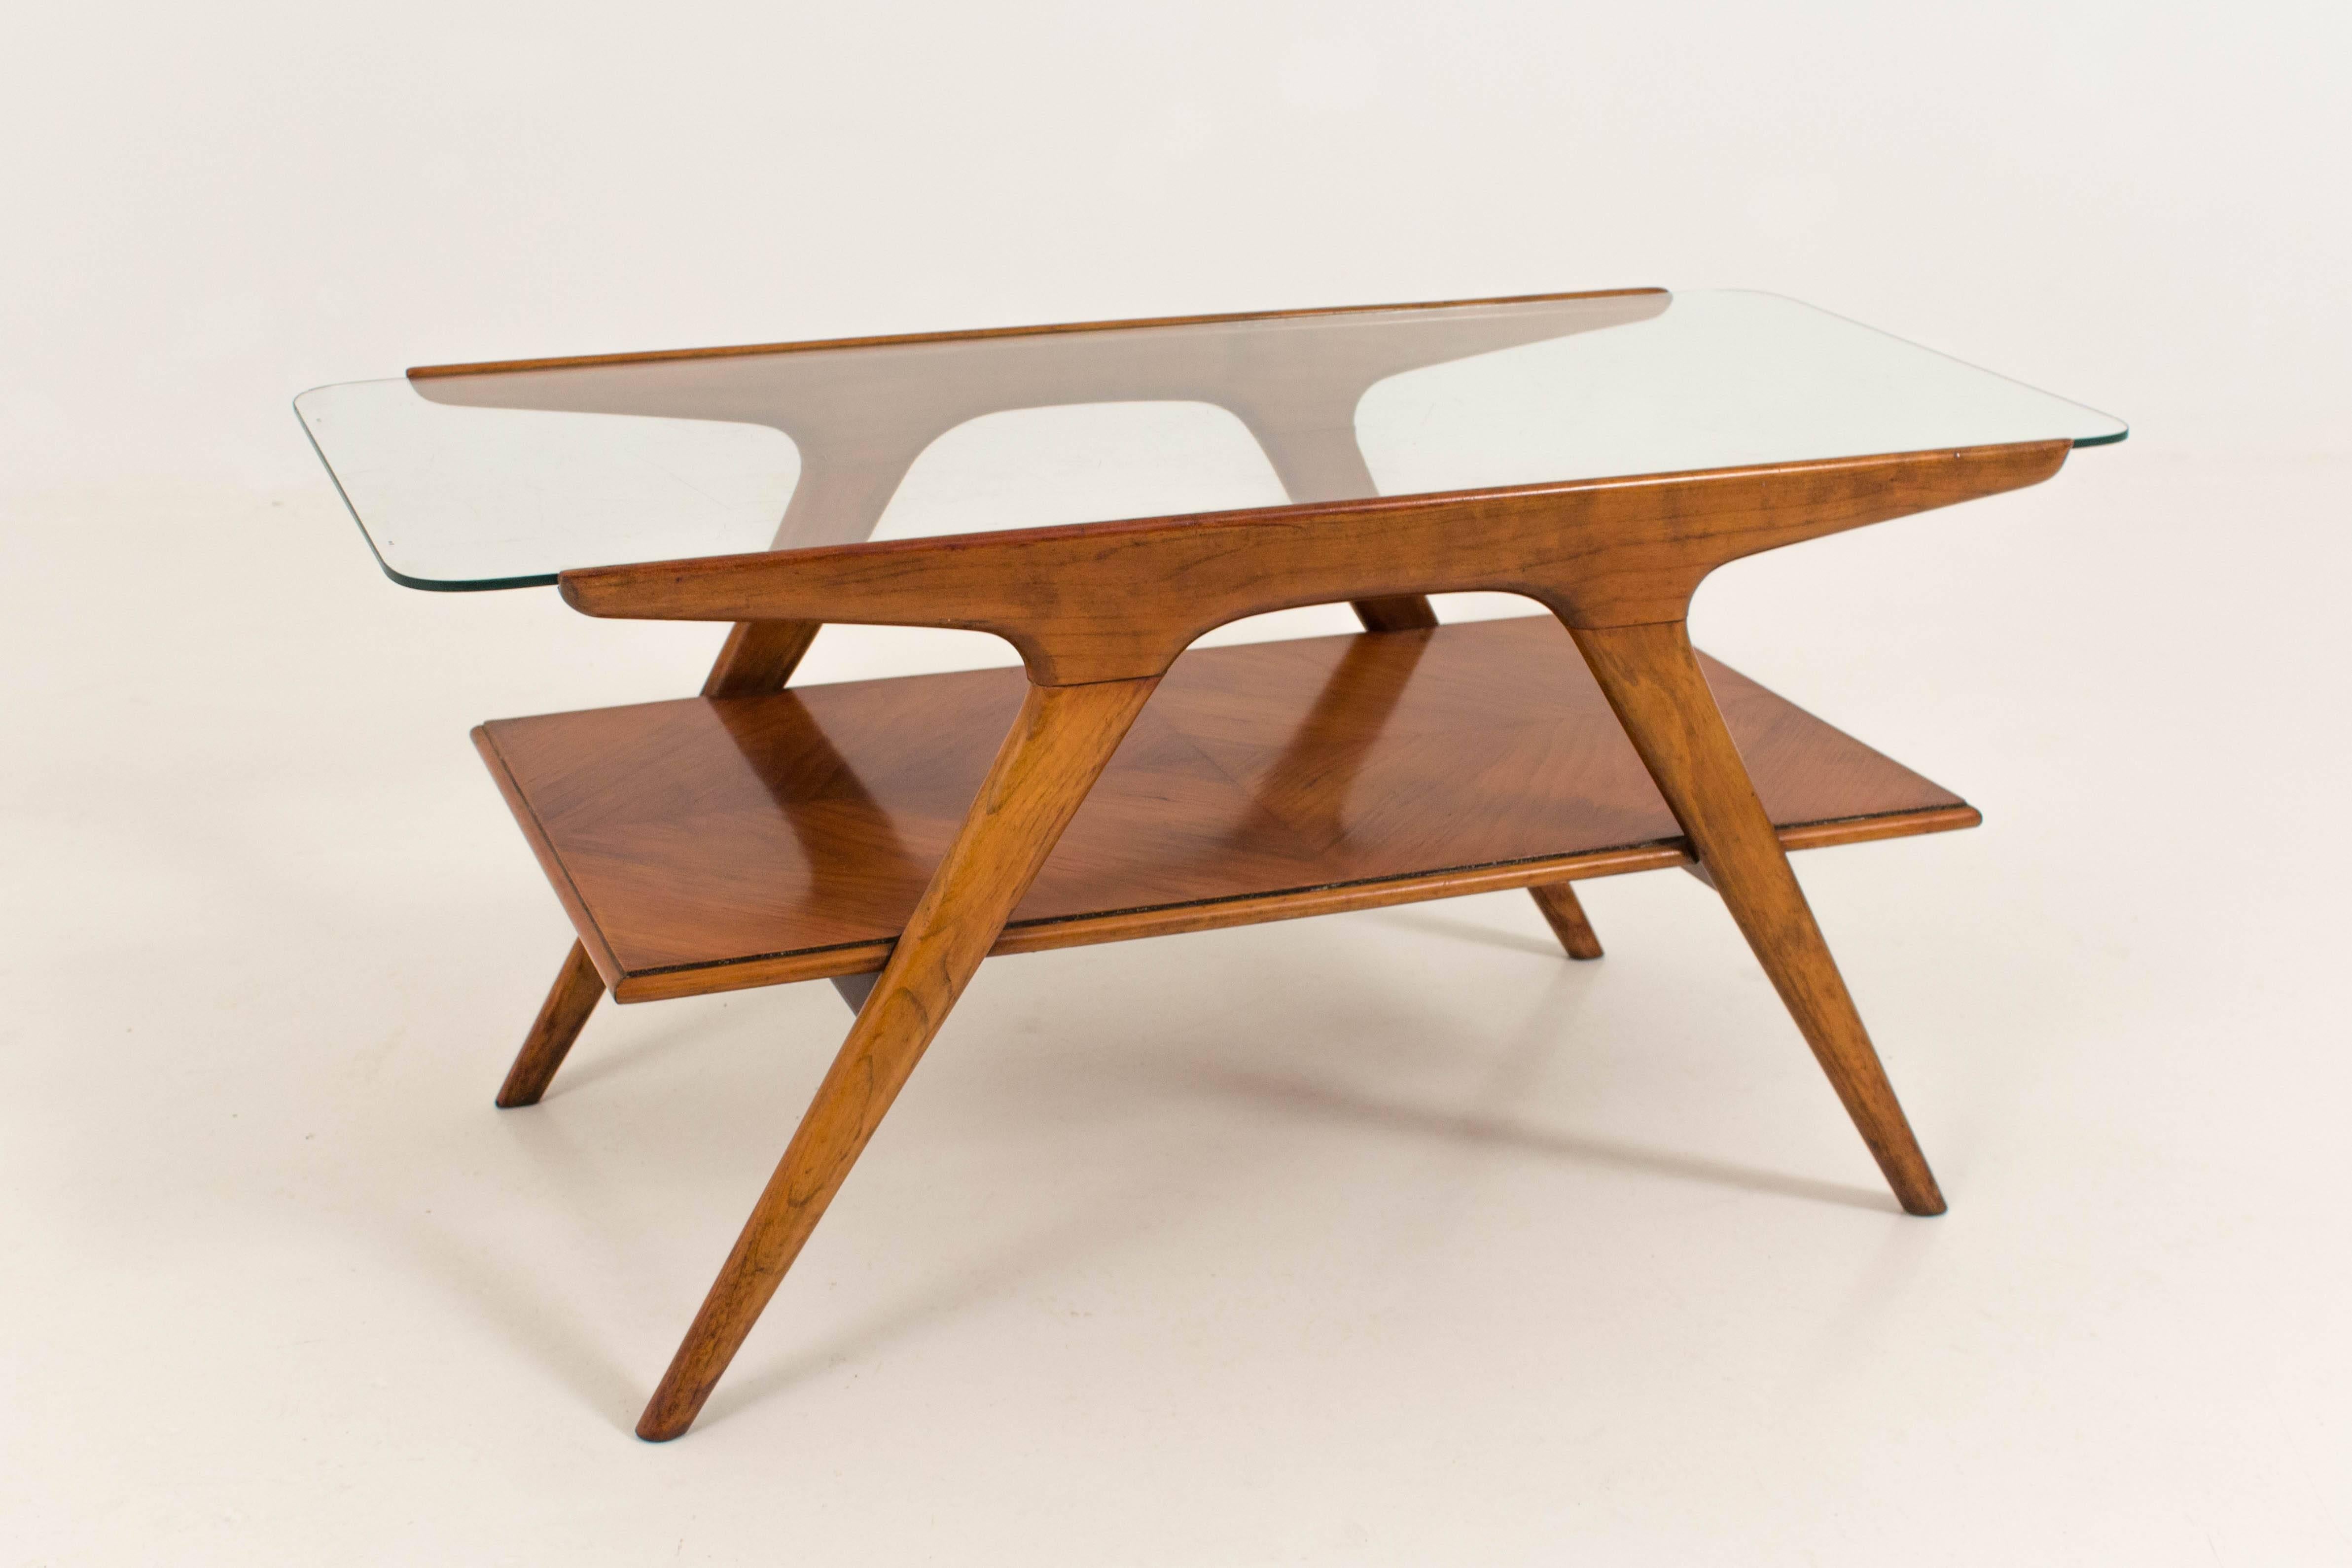 Italian Funky Mid-Century Modern Coffee Table by Cesare Lacca for Cassina